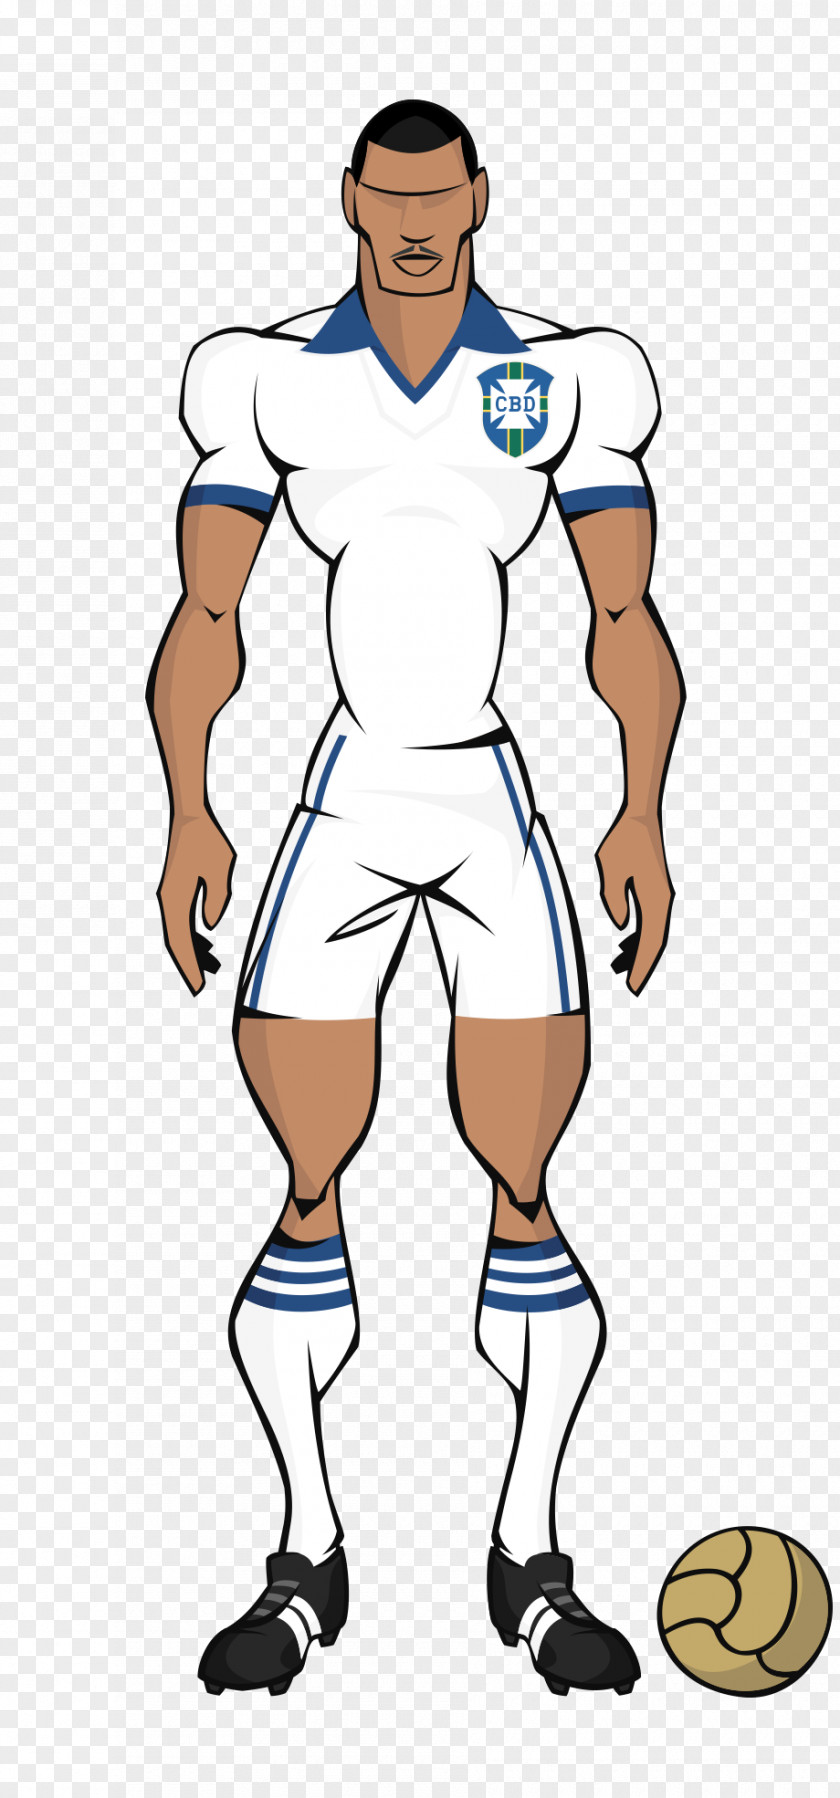 Football 1990 FIFA World Cup 1954 Player Kit PNG